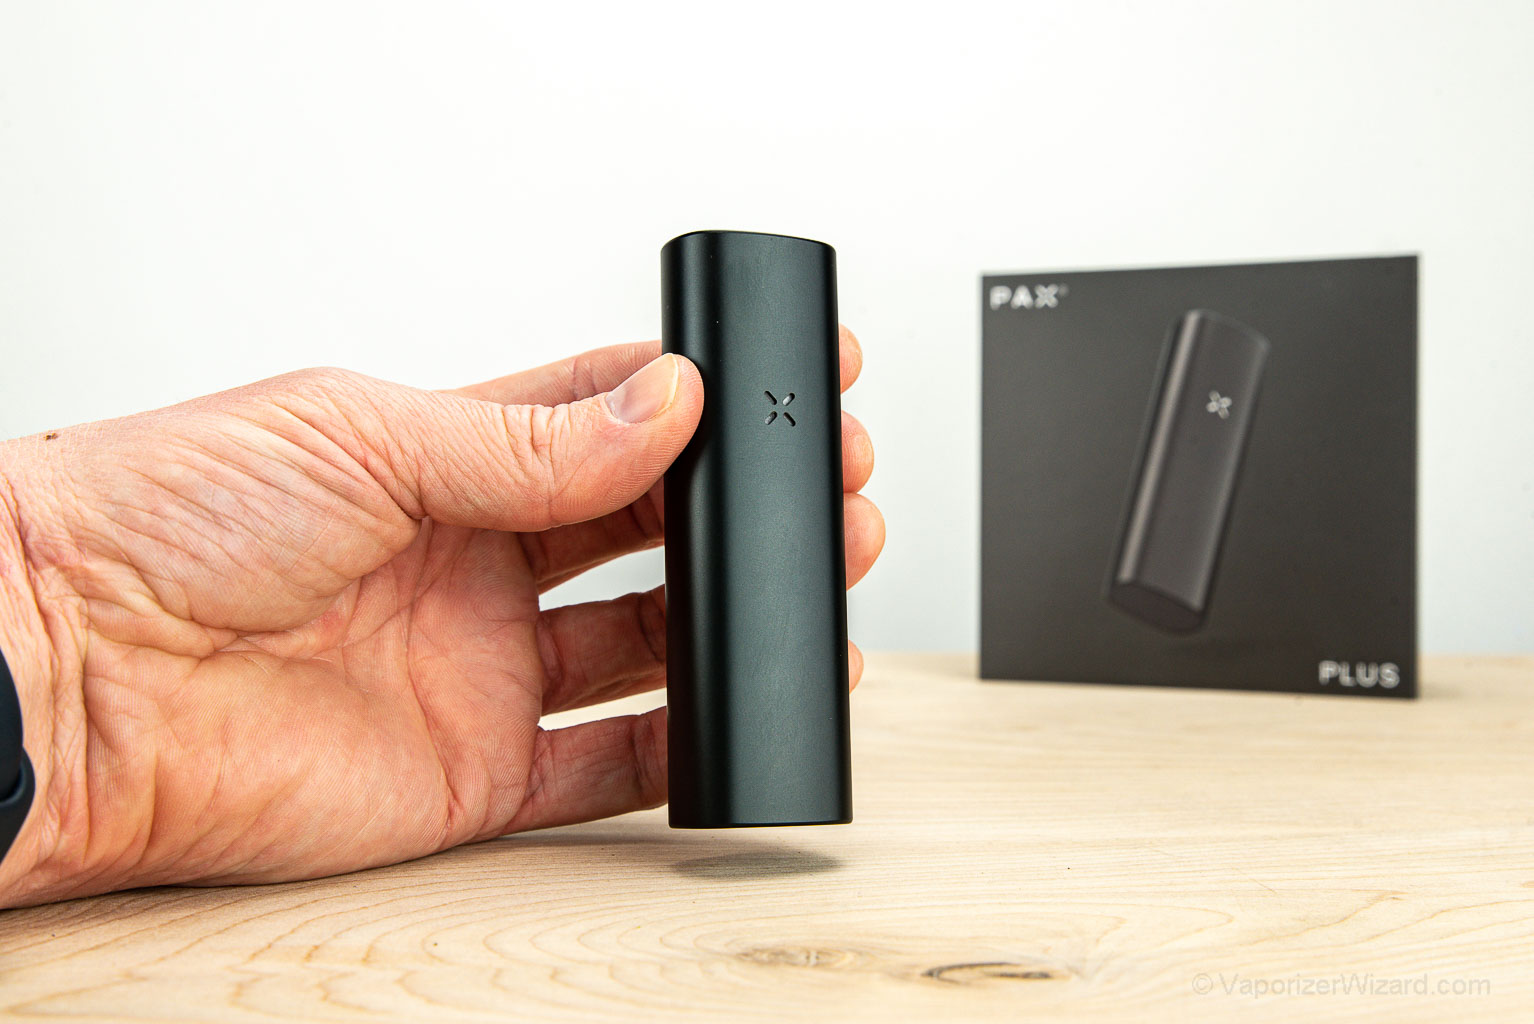 Pax 3 Basic Kit Dry Herb and Concentrate Vaporizer For Sale — Vape Pen Sales